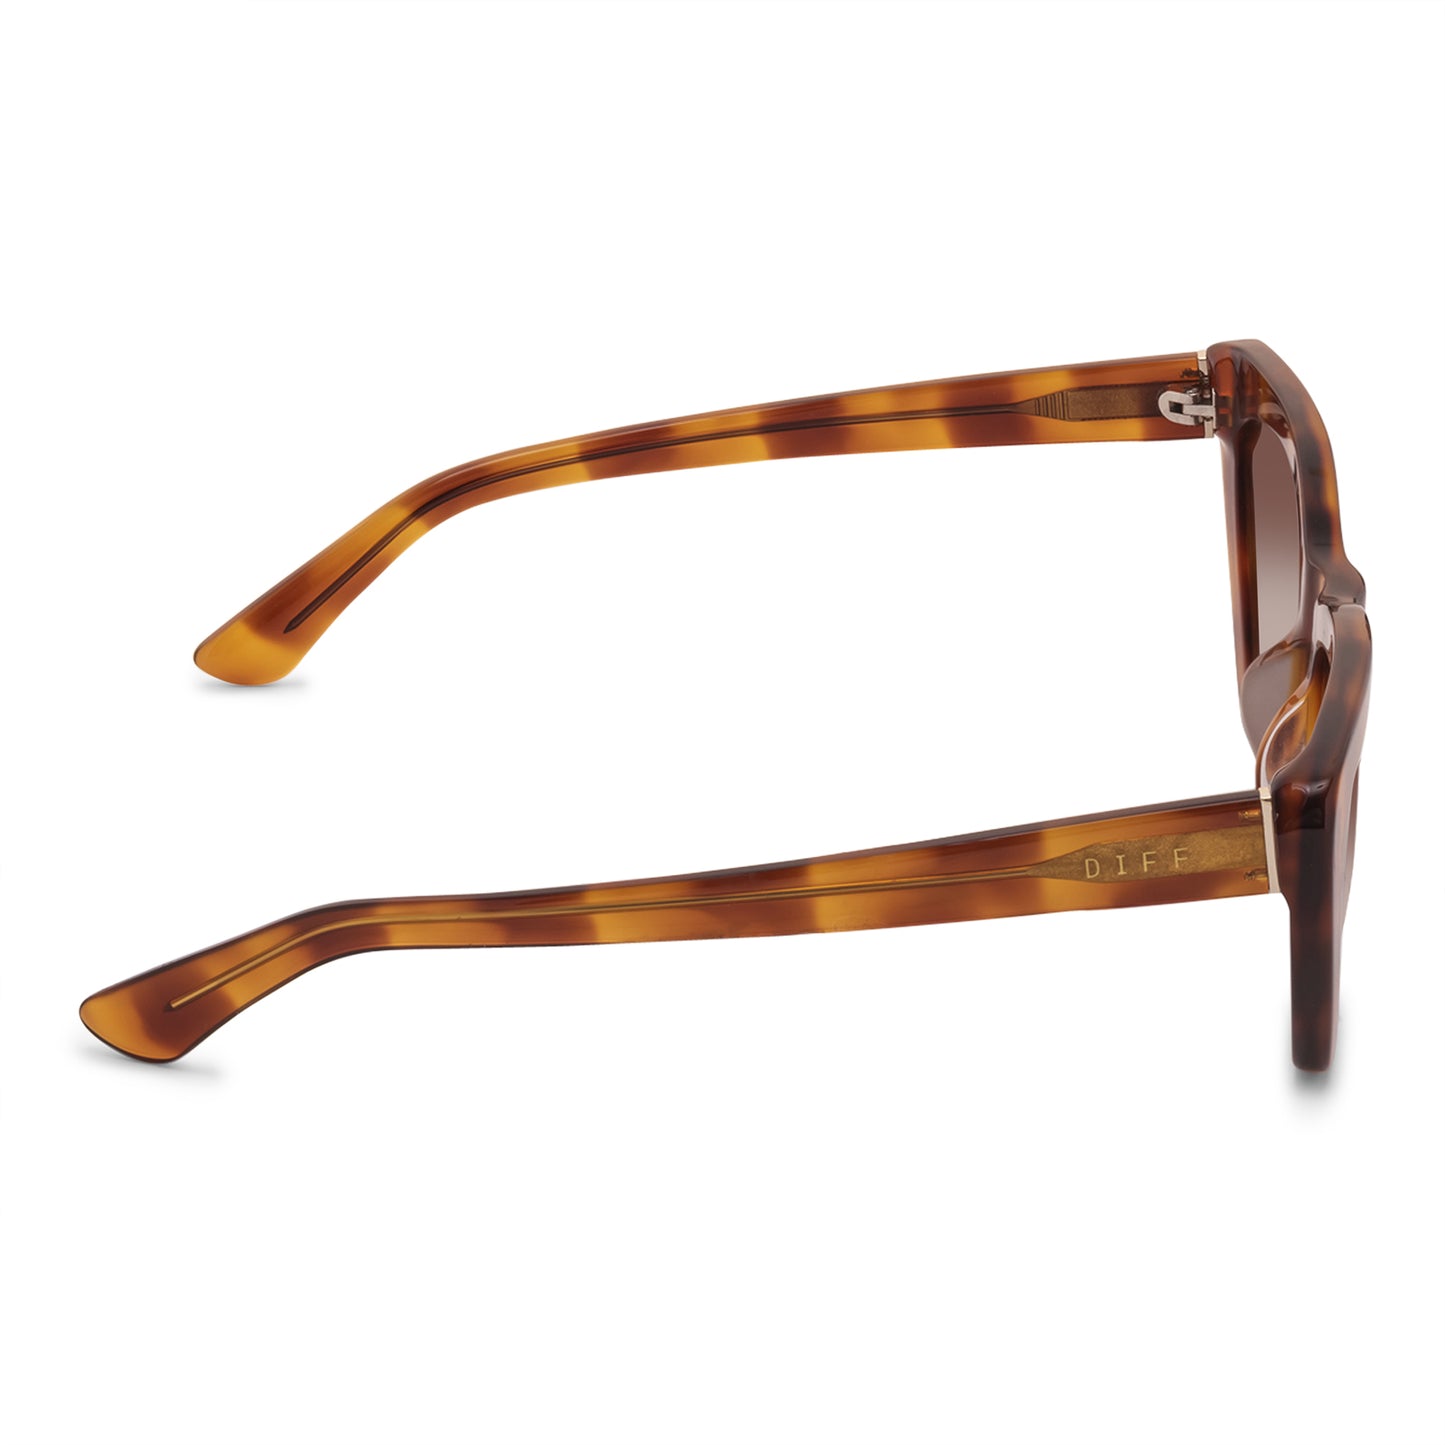 Camila Andes Tortoise Brown Gradient Polarized